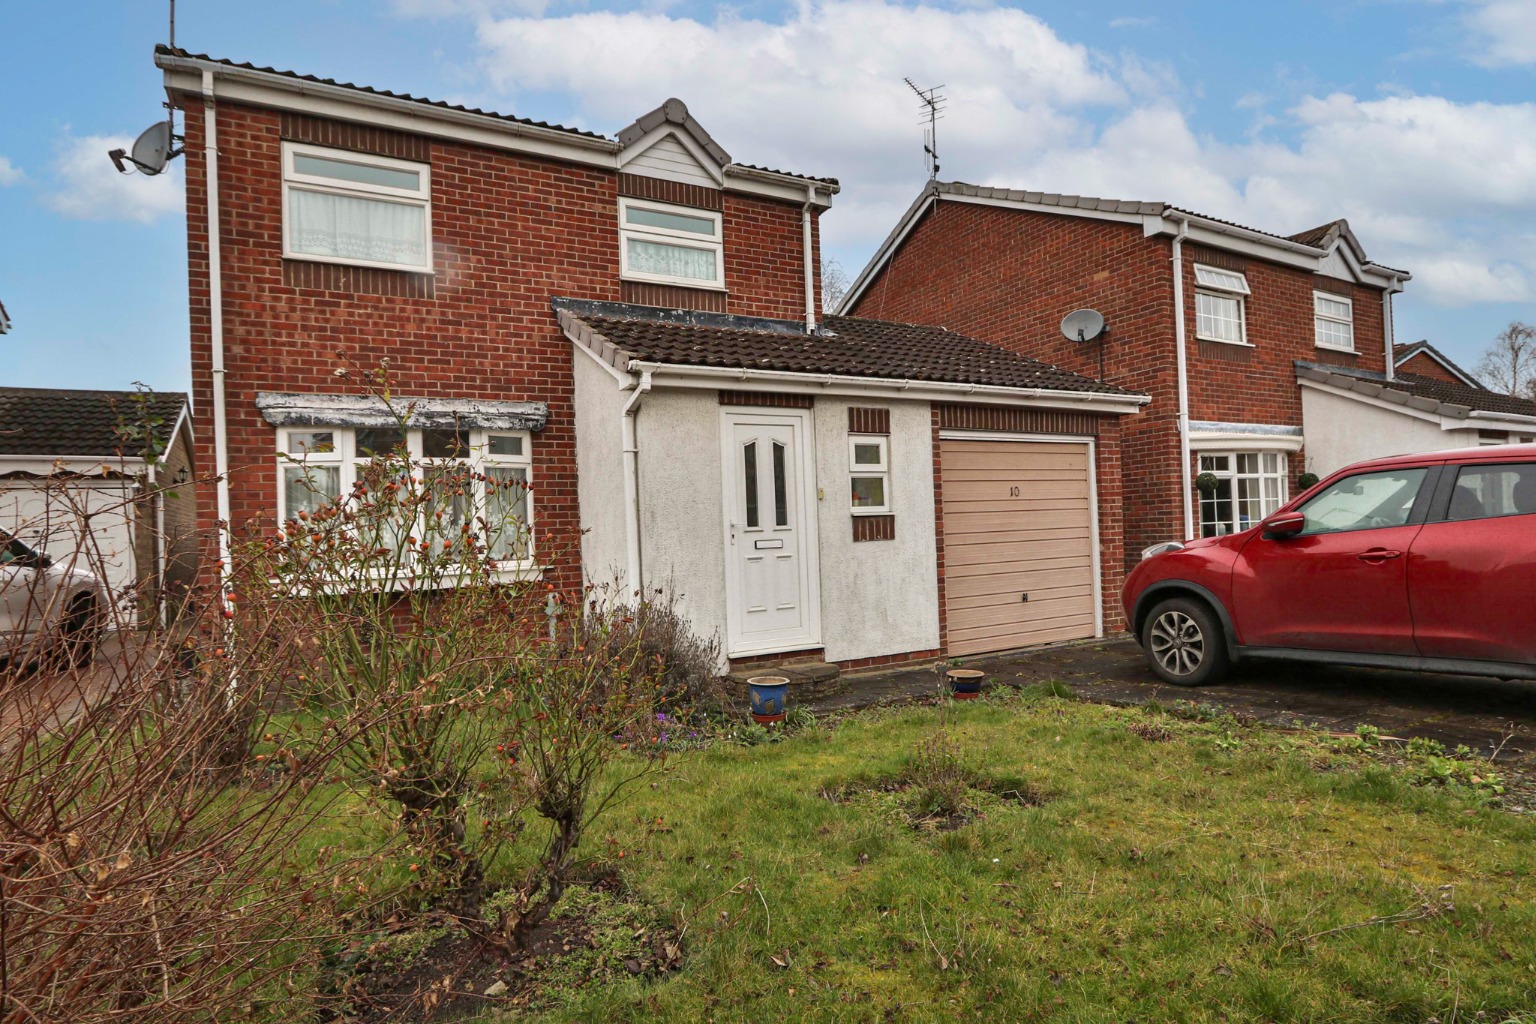 3 bed detached house for sale - Property Image 1